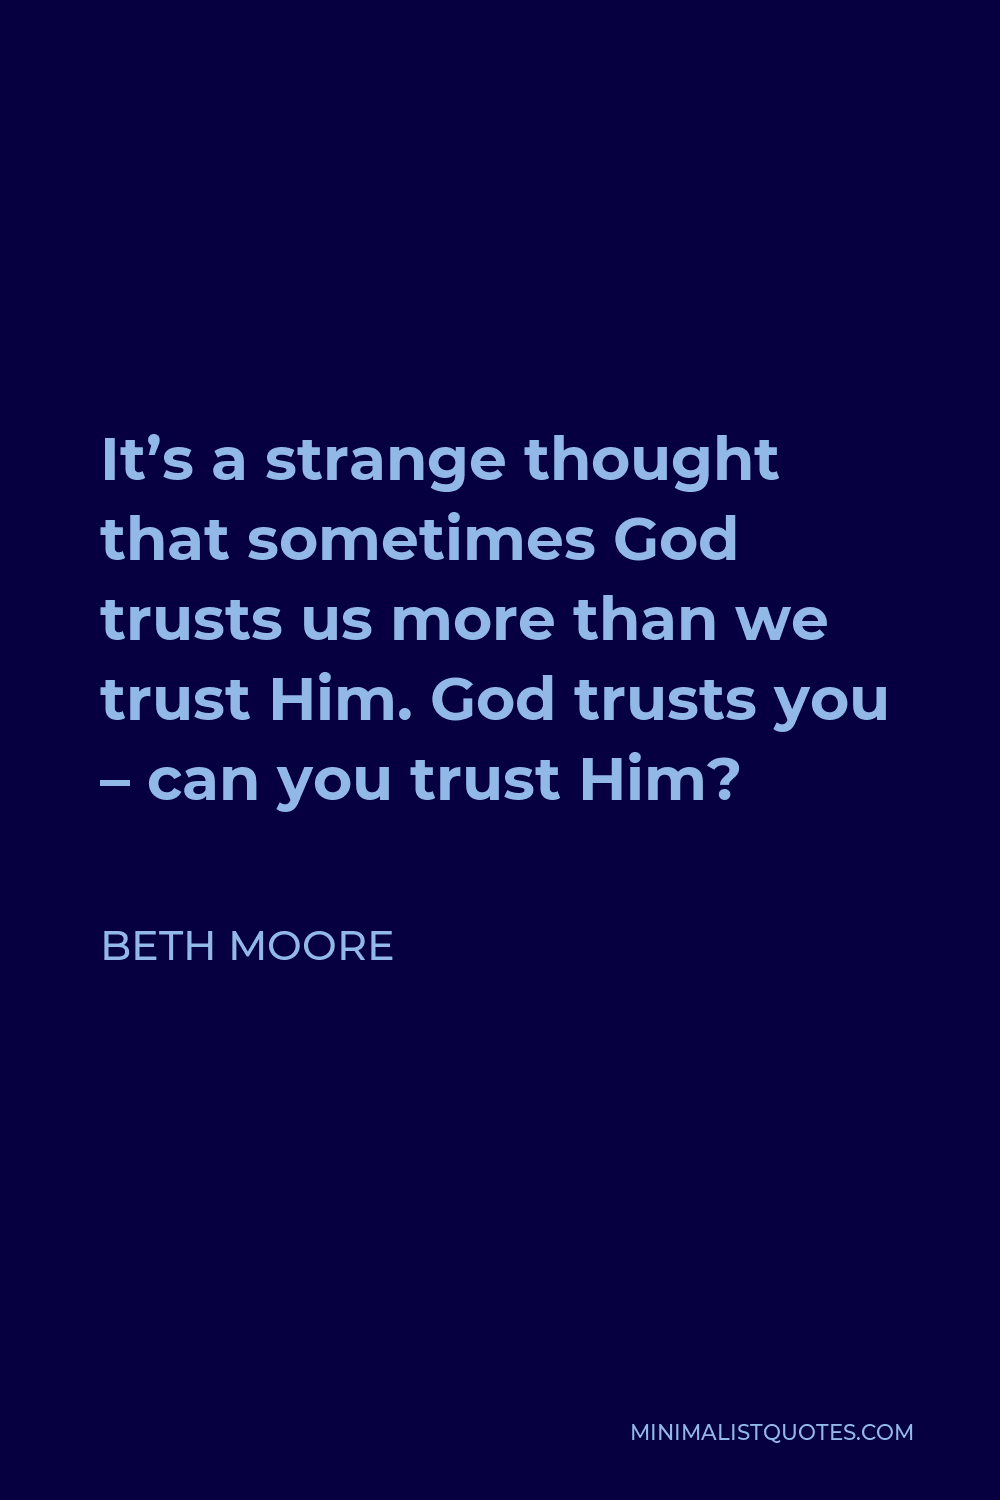 Beth Moore Quote - It’s a strange thought that sometimes God trusts us more than we trust Him. God trusts you – can you trust Him?